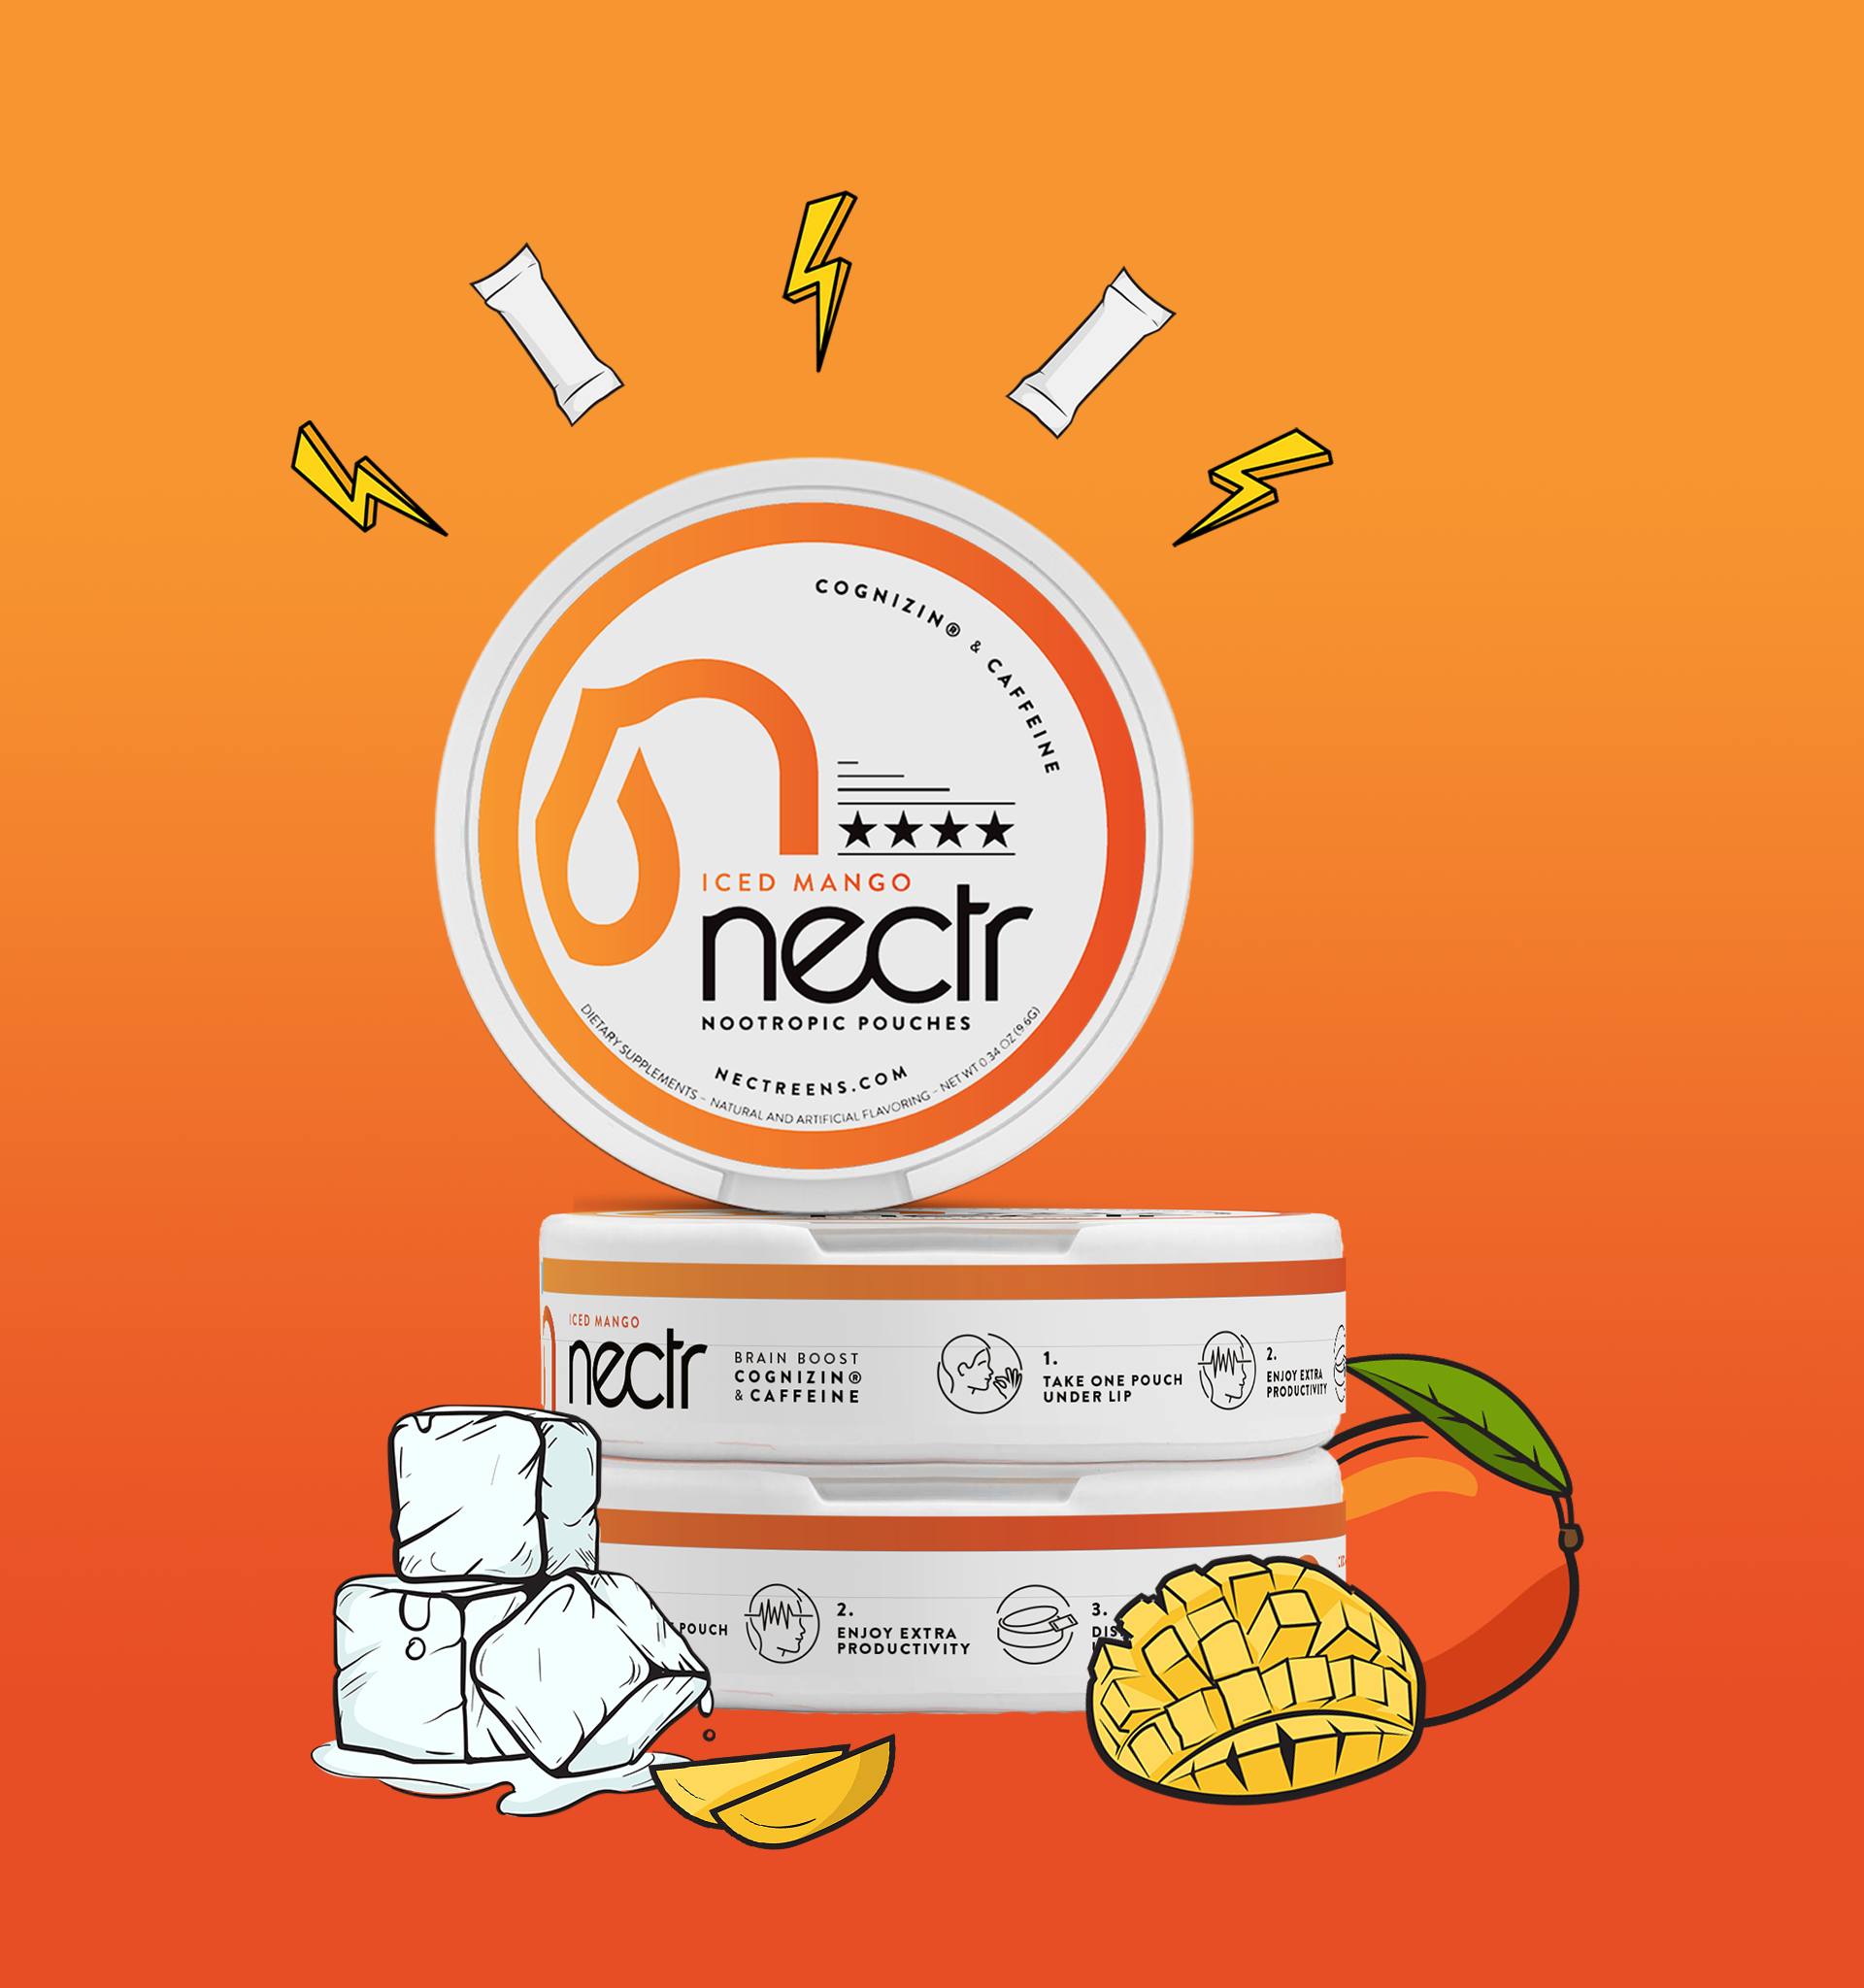 Iced Mango - Nectr Nootropic Pouches